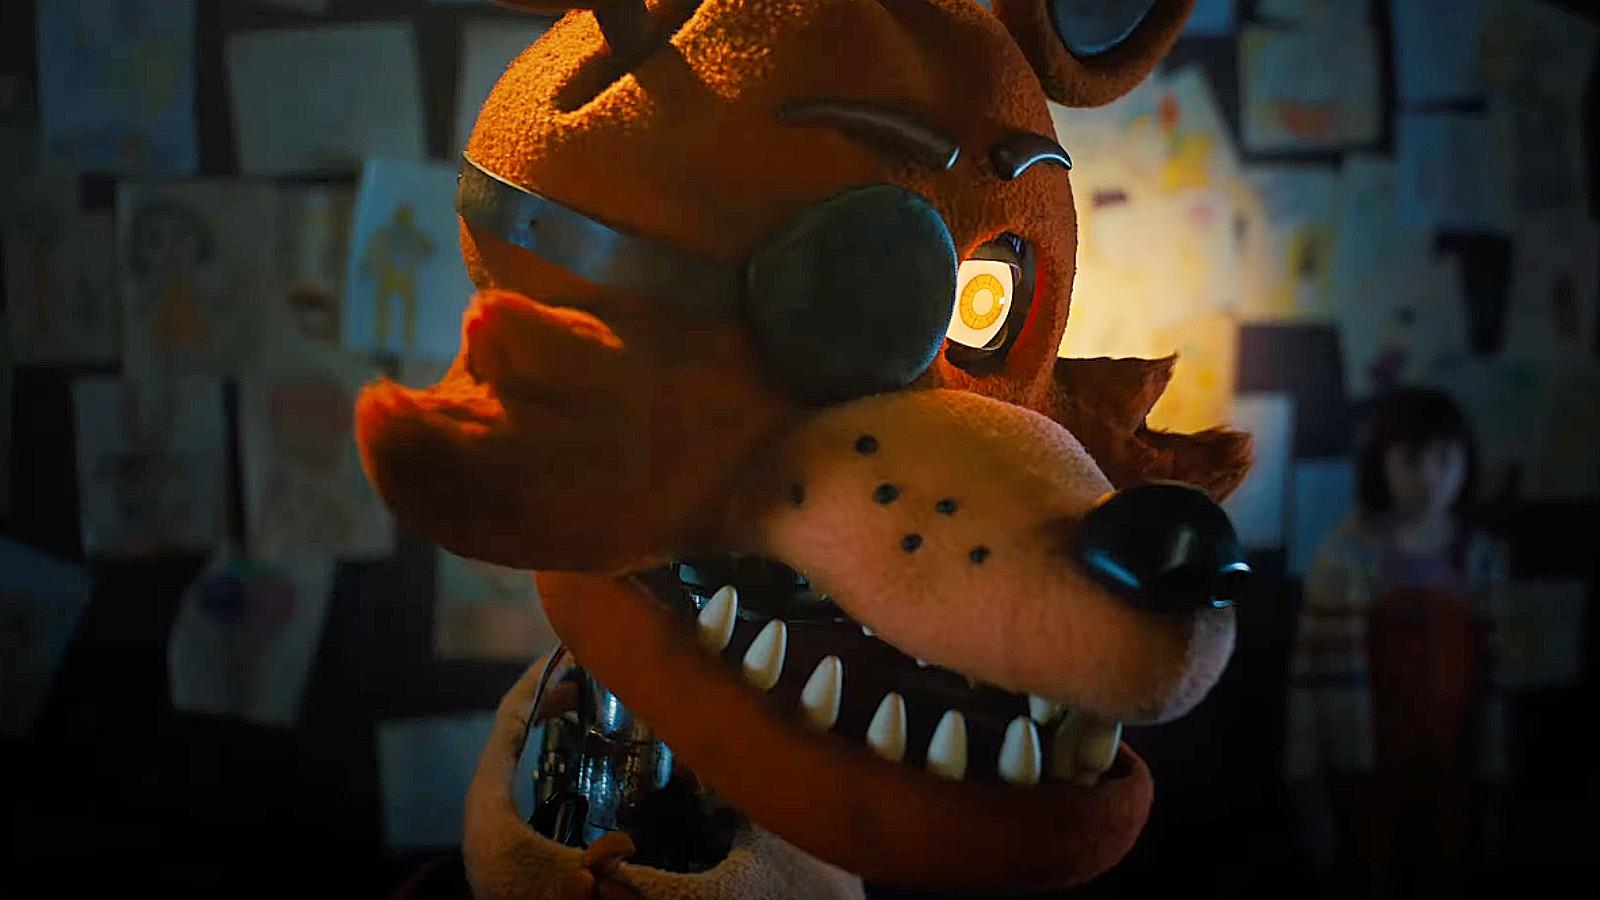 A still from the Five Nights at Freddy's movie trailer